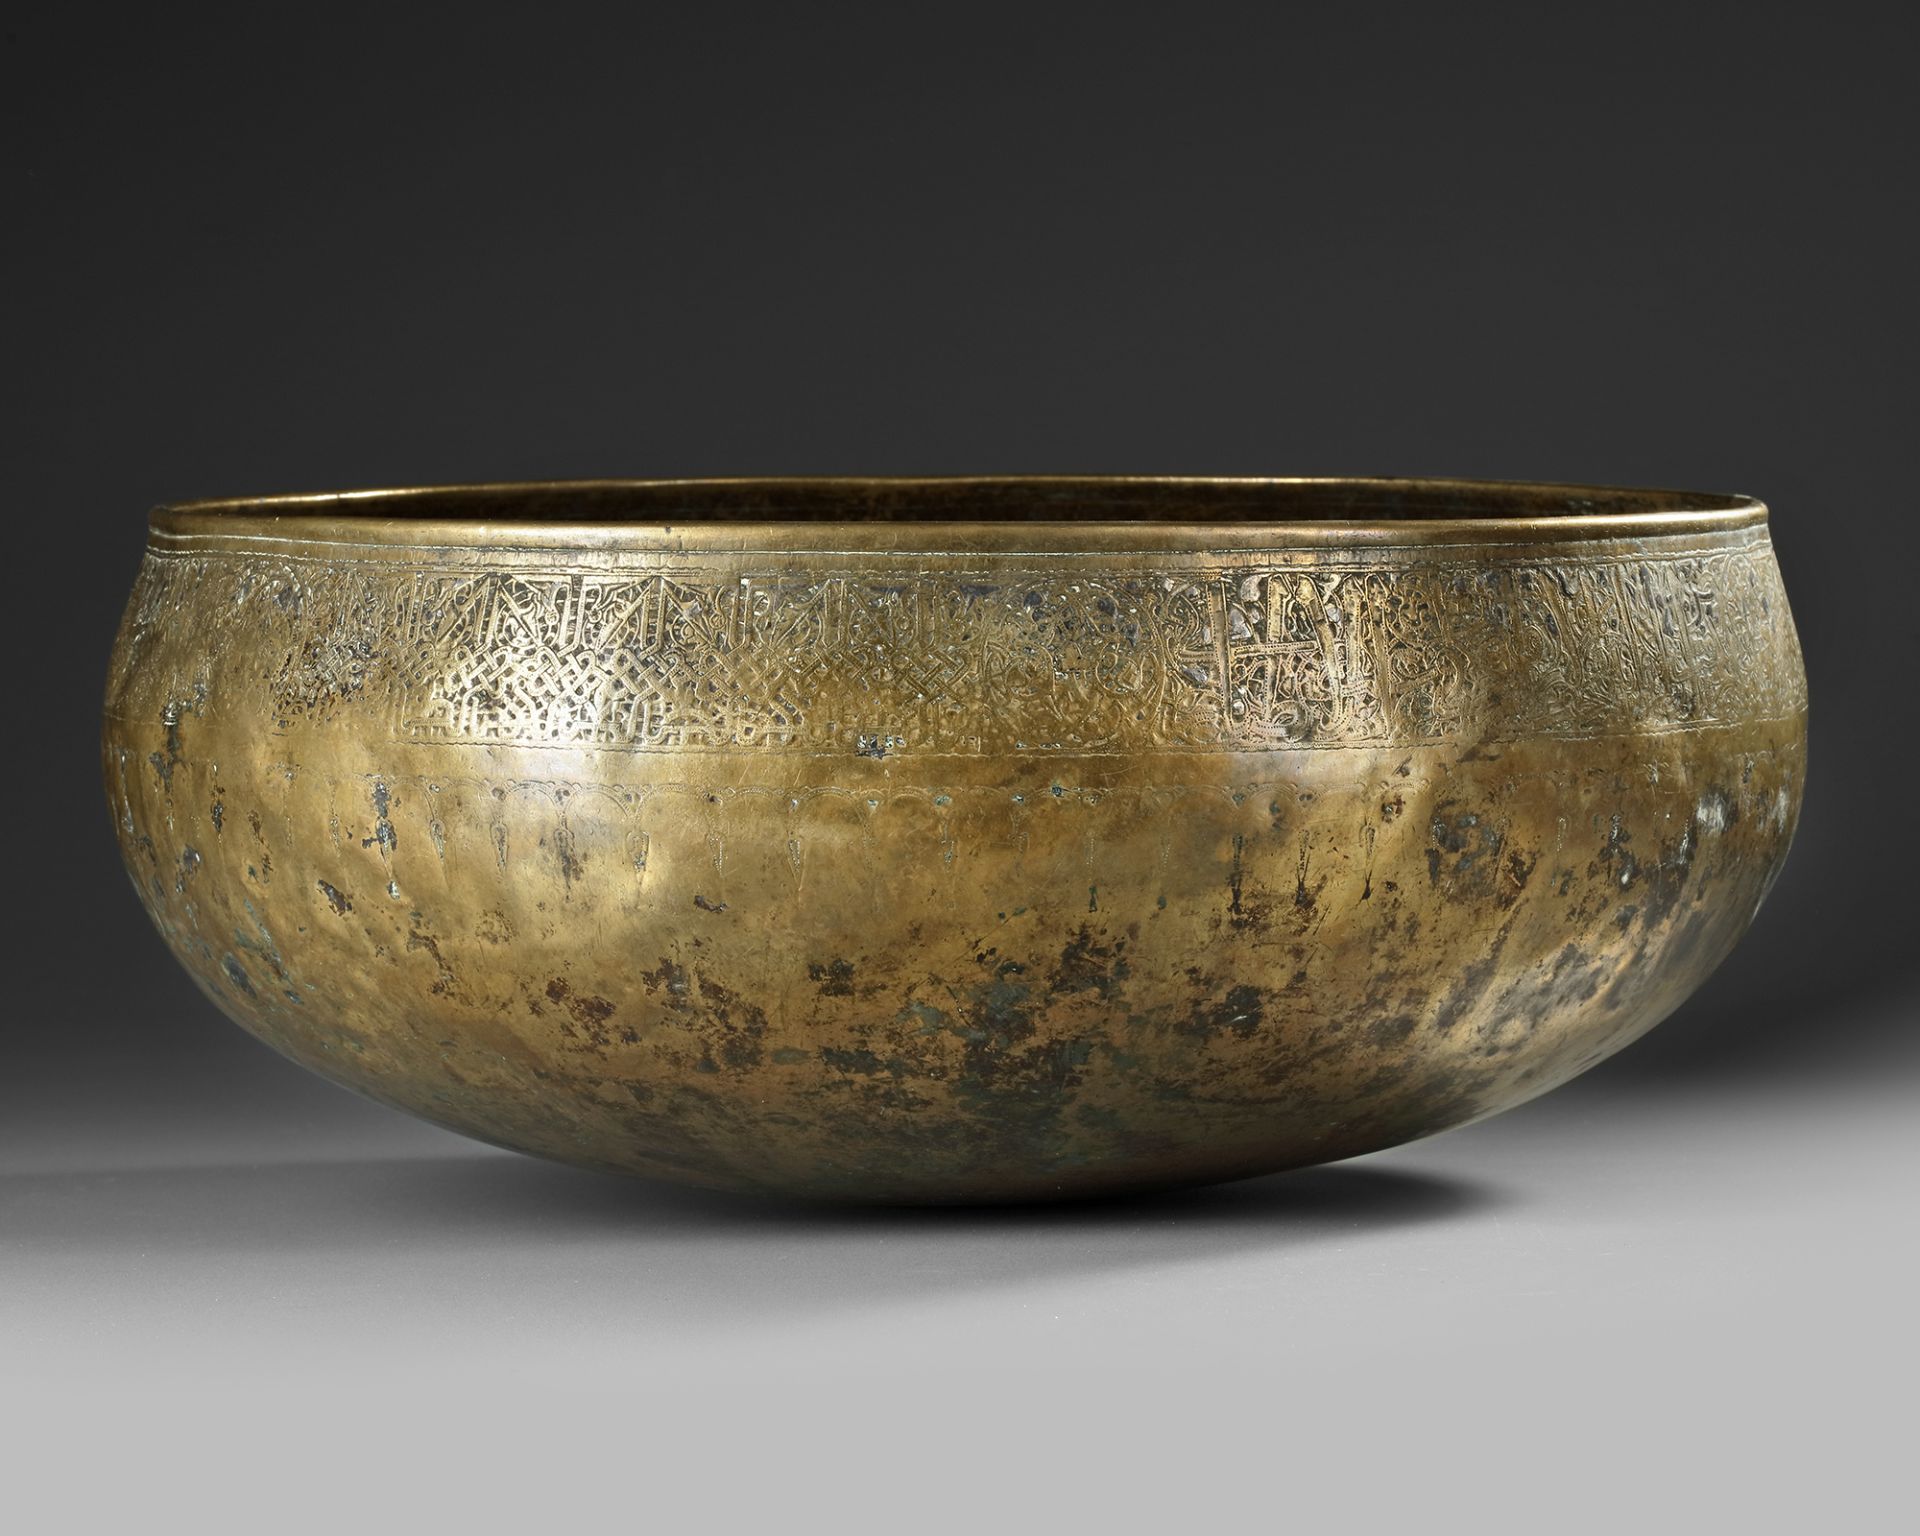 A LARGE MAMLUK BRASS BOWL WITH INSCRIPTIONS, EGYPT OR SYRIA, 14TH CENTURY